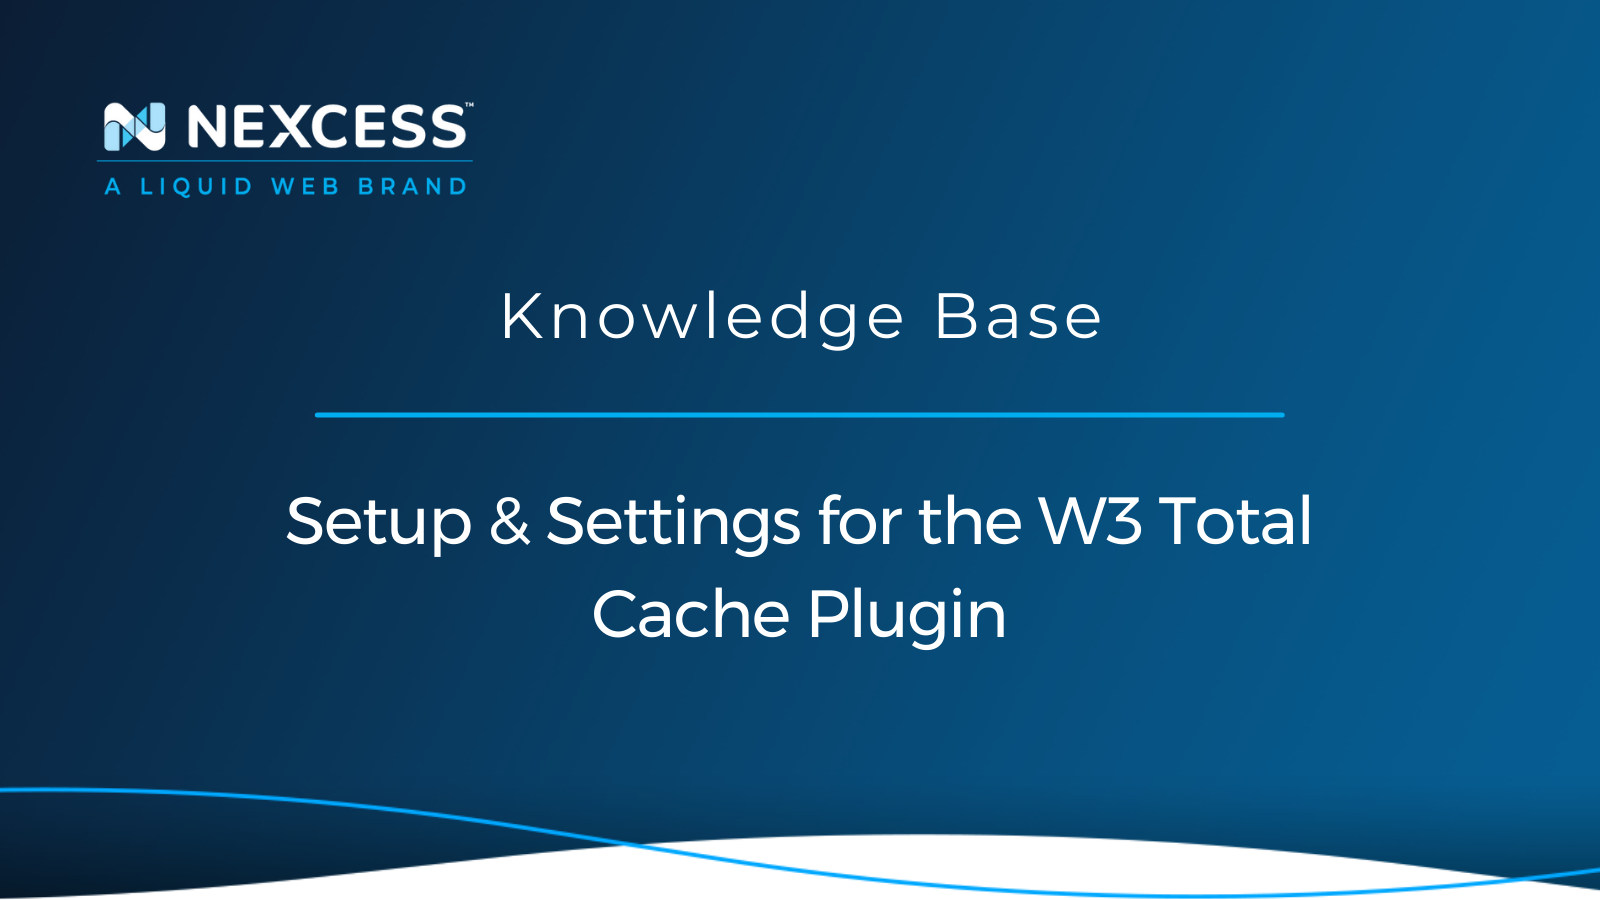 Setup & Settings for the W3 Total Cache Plugin